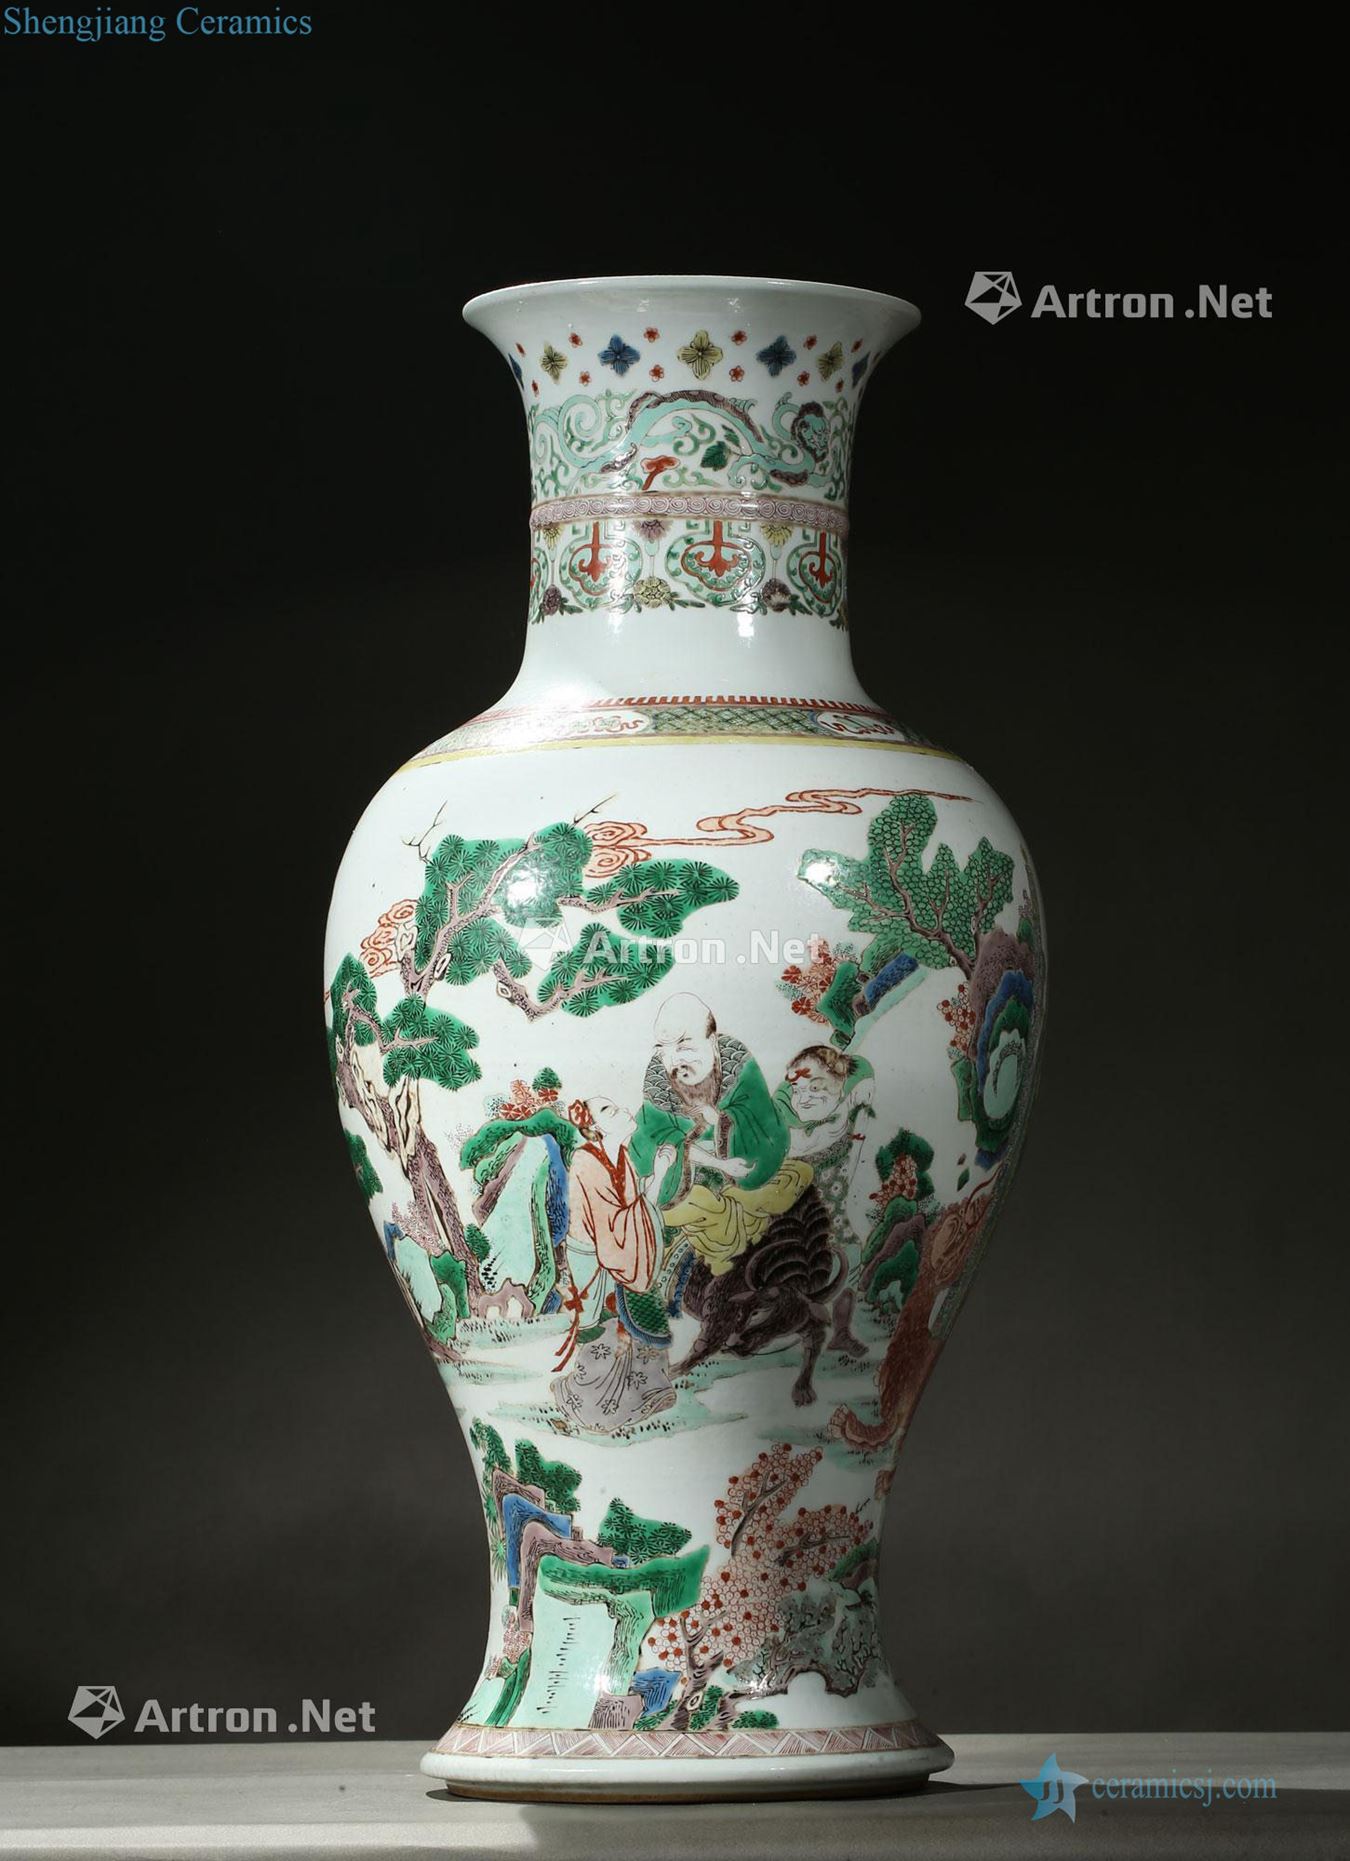 Qing stories show the large bottle of colorful characters